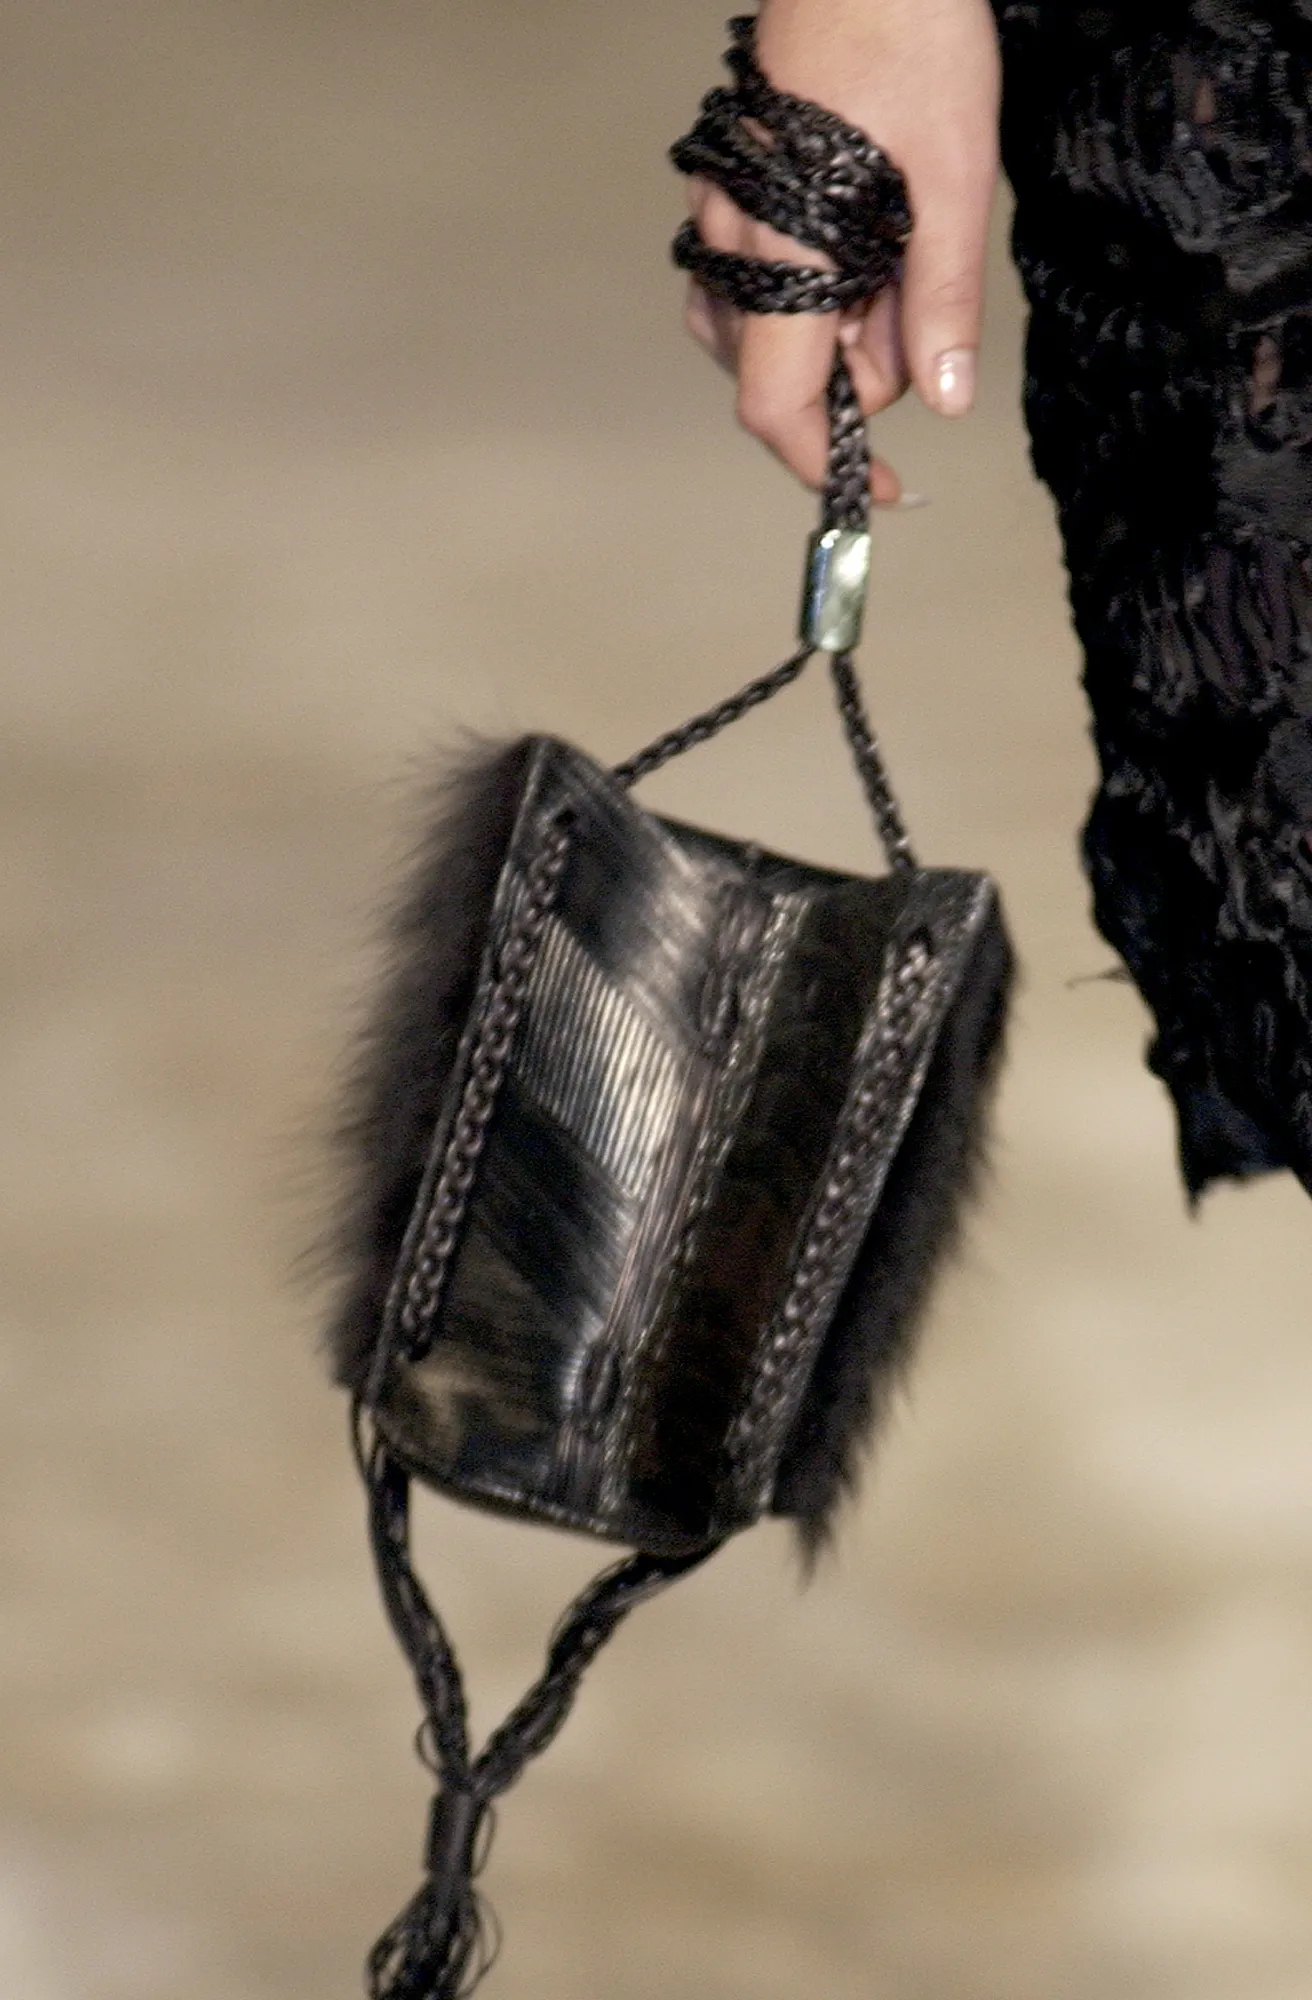 A GUCCI LEATHER EMBOSSED HANDBAG WITH FUR DETAILING - Image 3 of 4